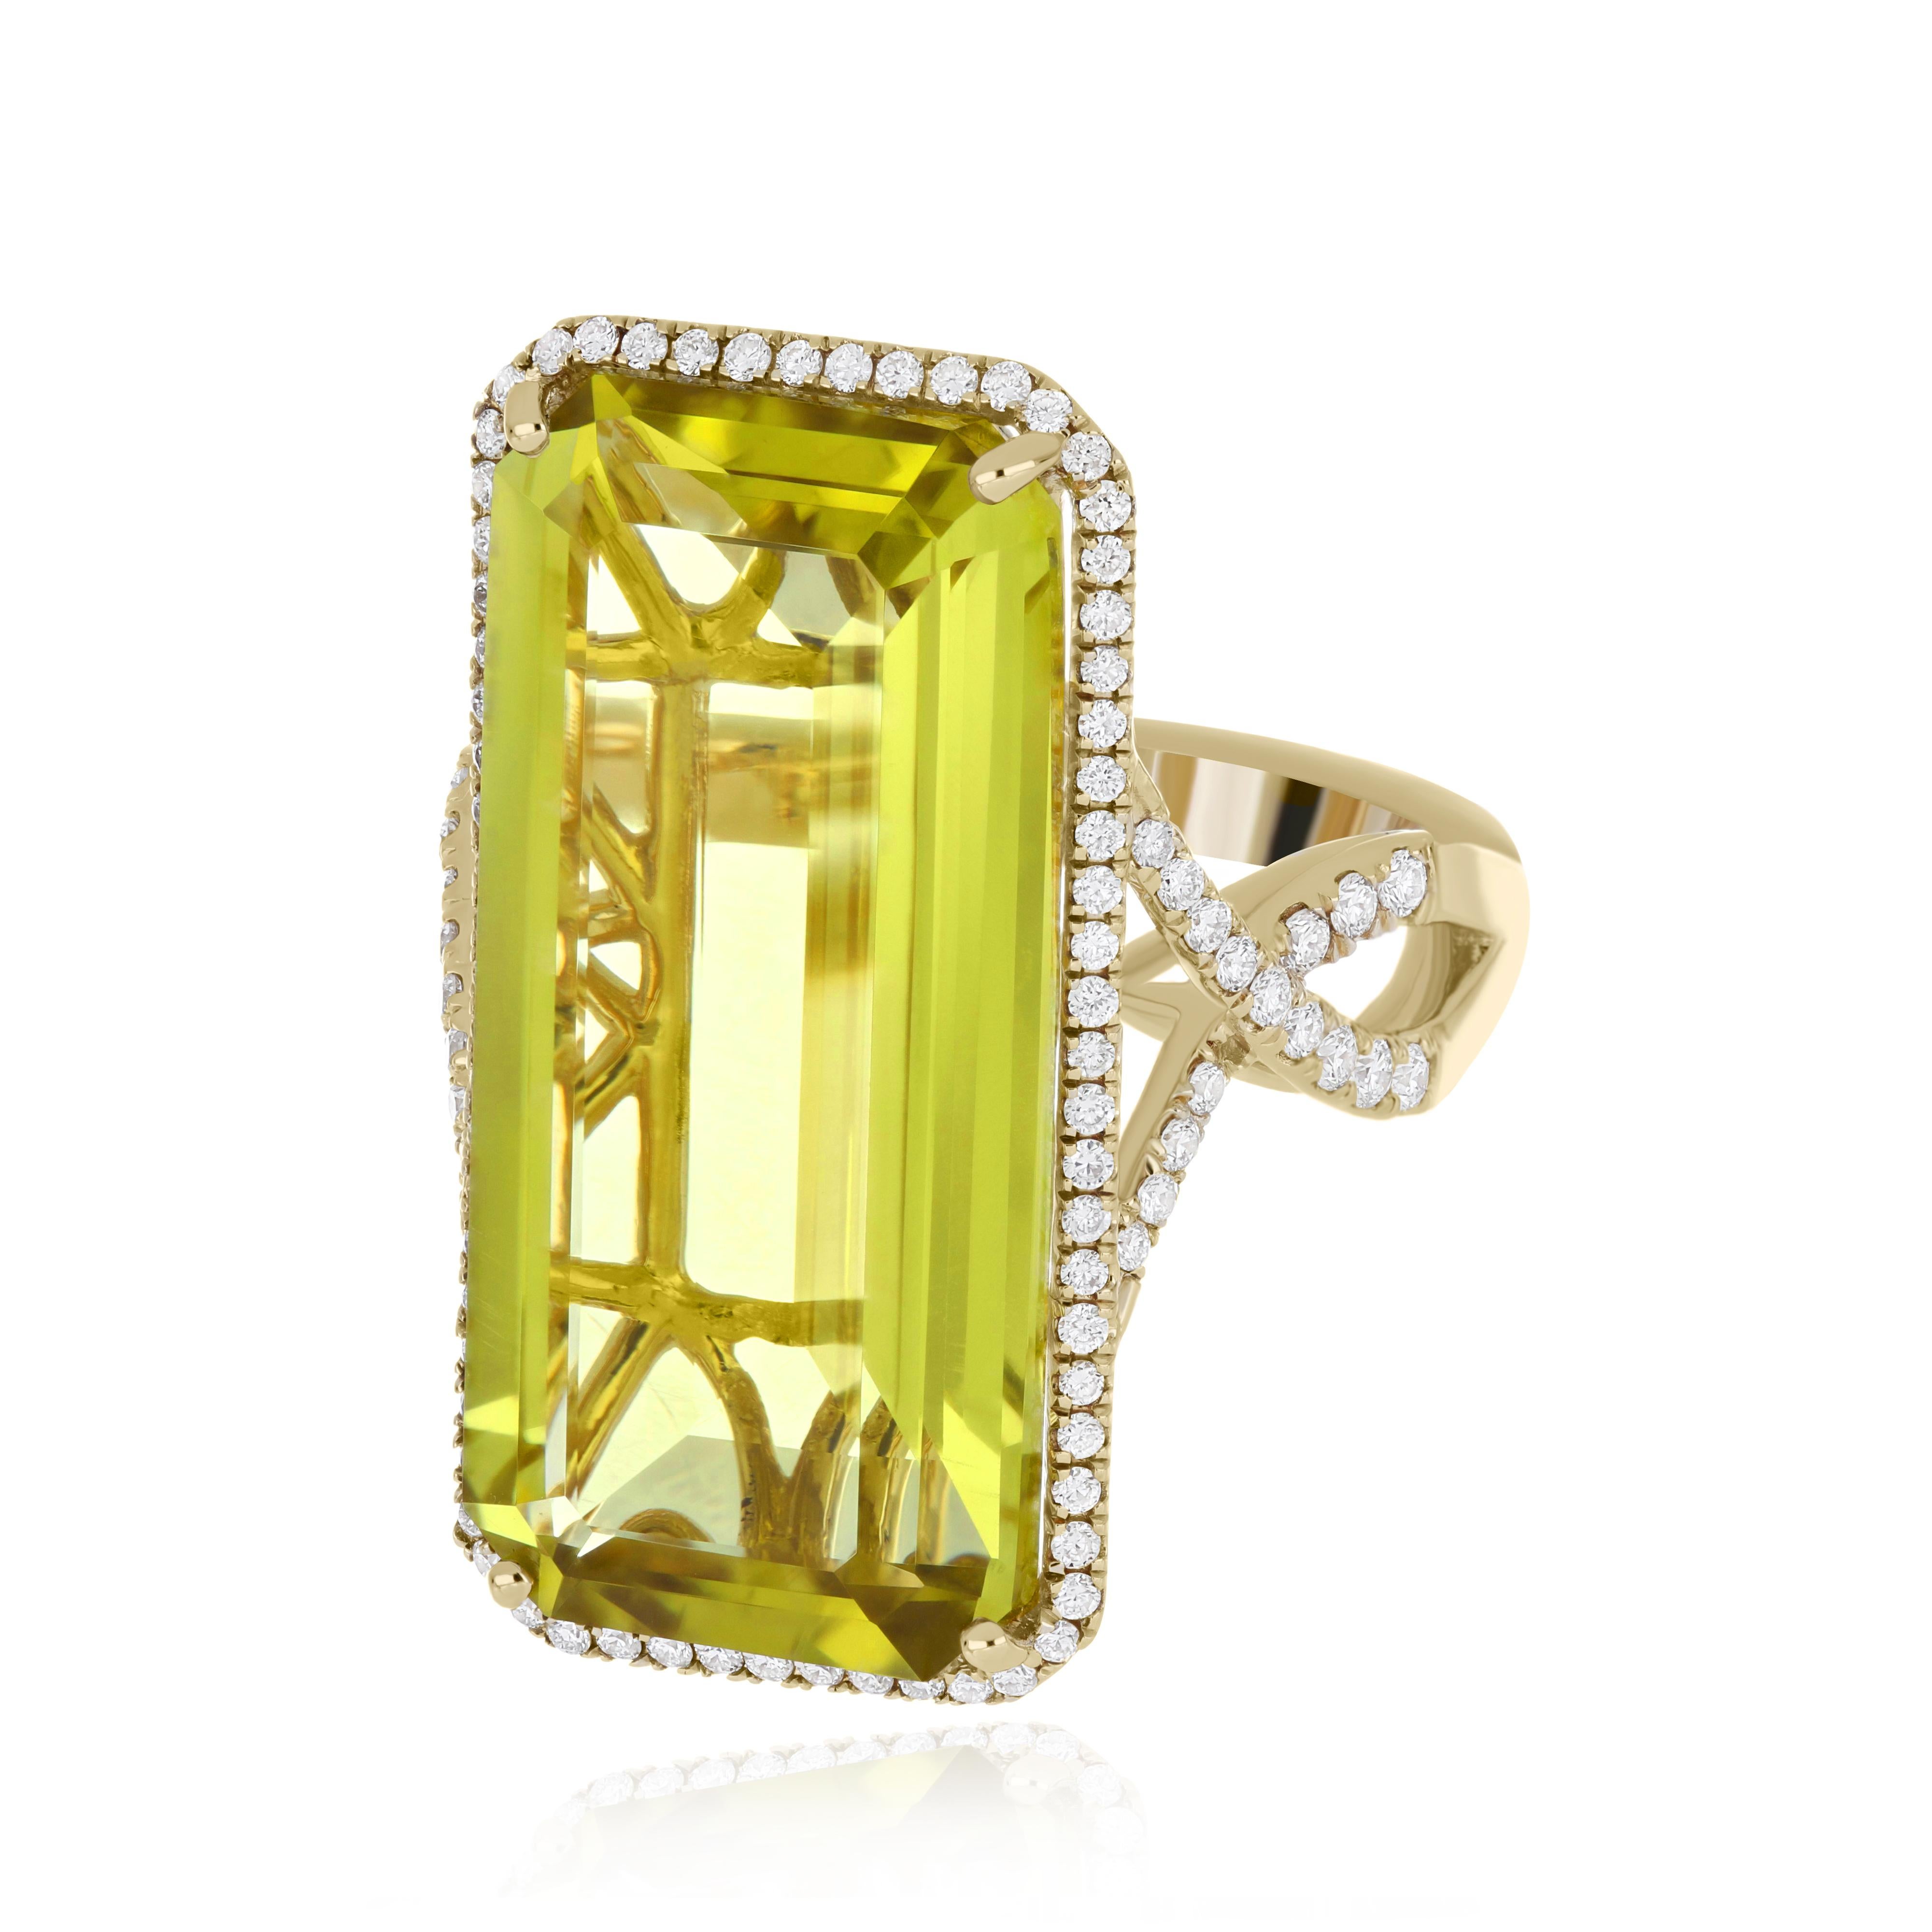 For Sale:  18.35cts Lemon Citrine and Diamond 14 Karat Yellow Gold Ring for New Year Gift  3